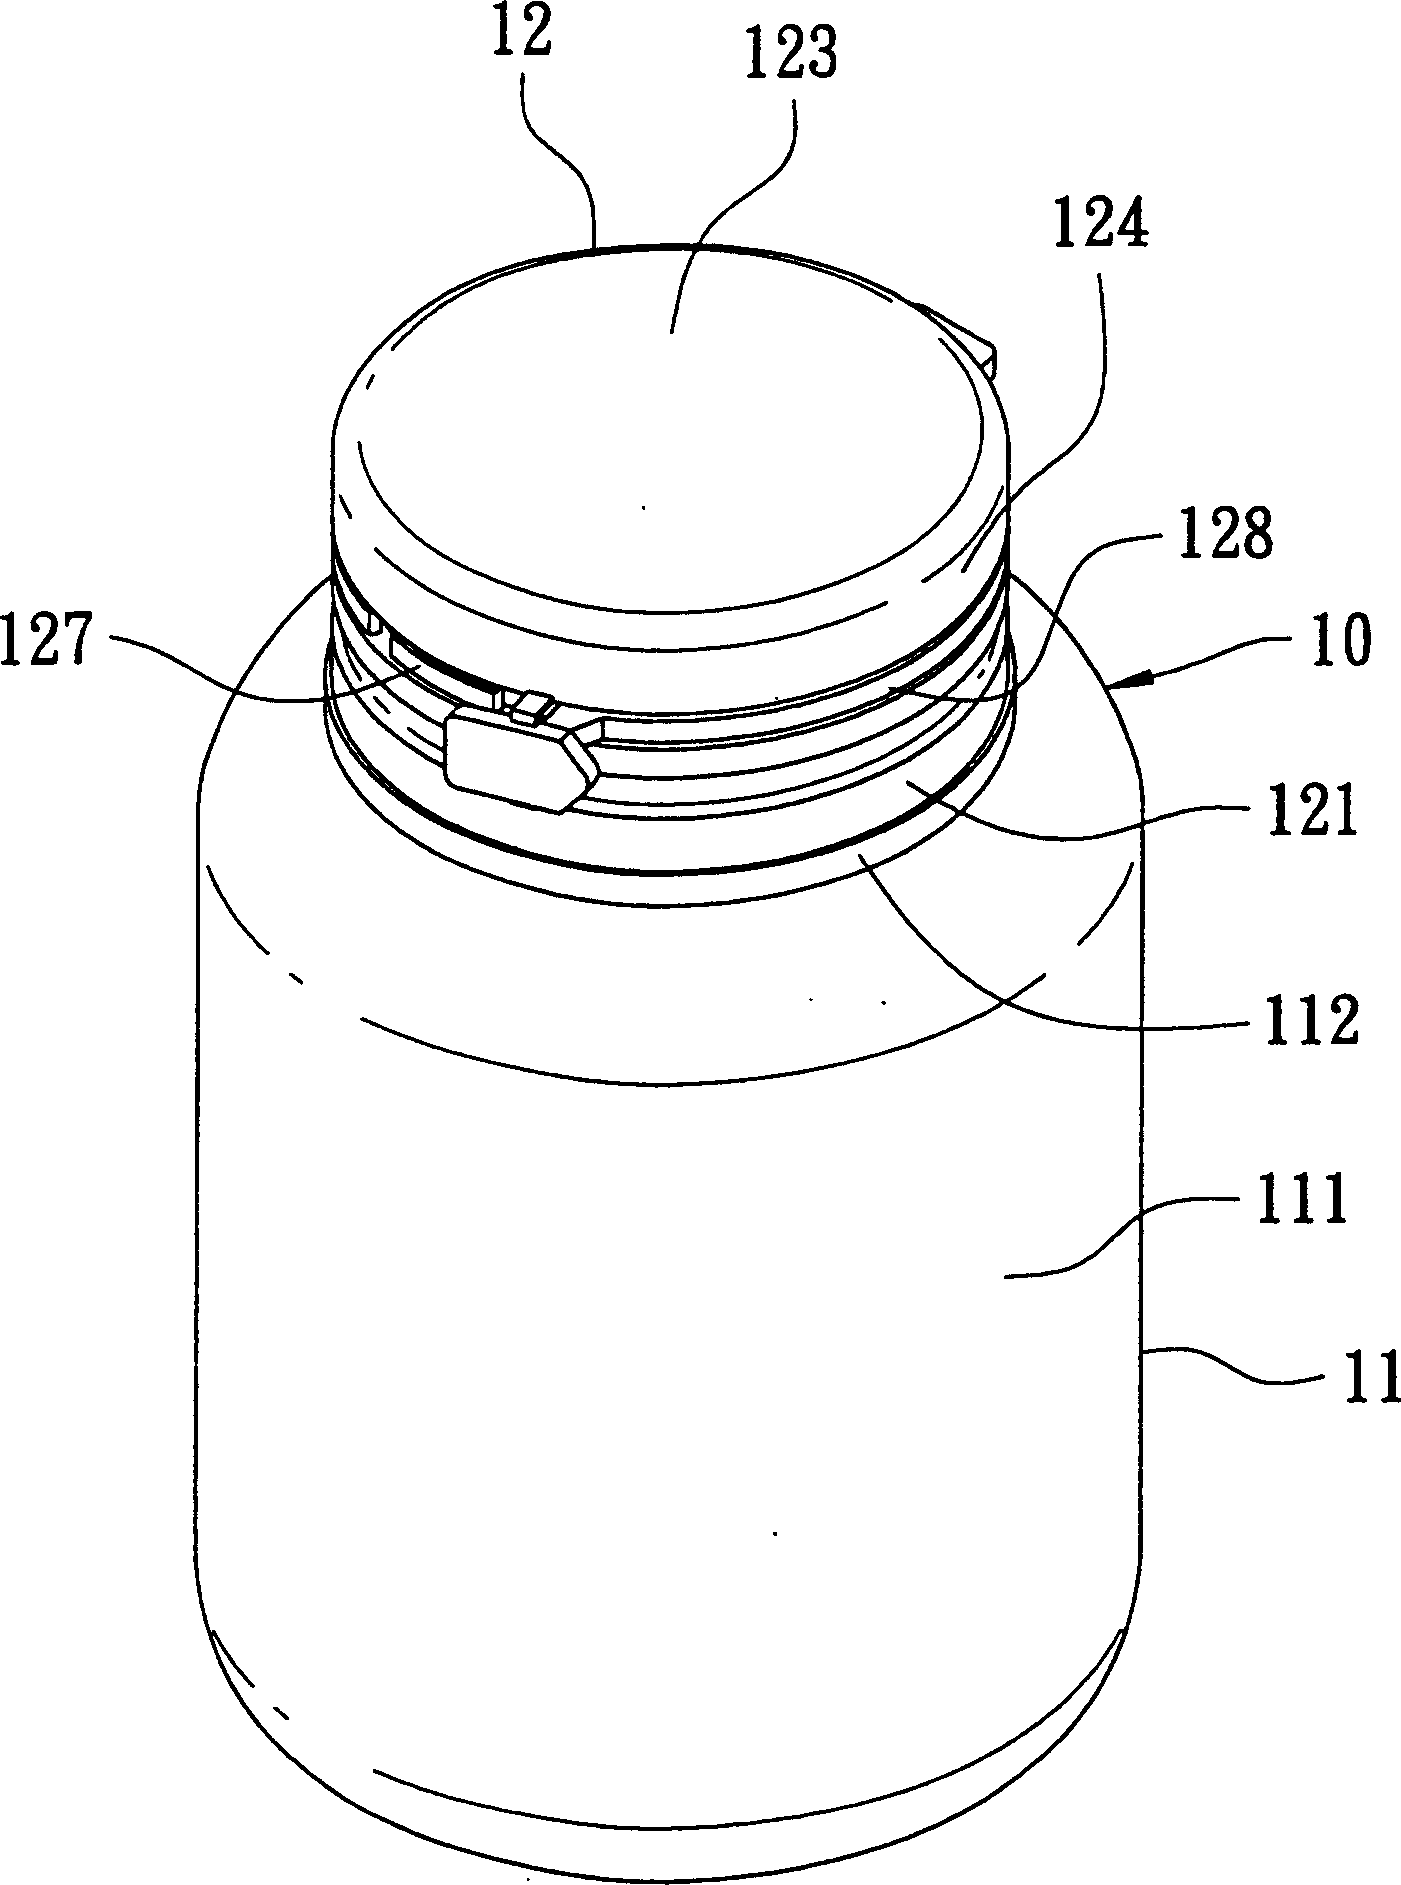 Non-circular container possessing safety annular band